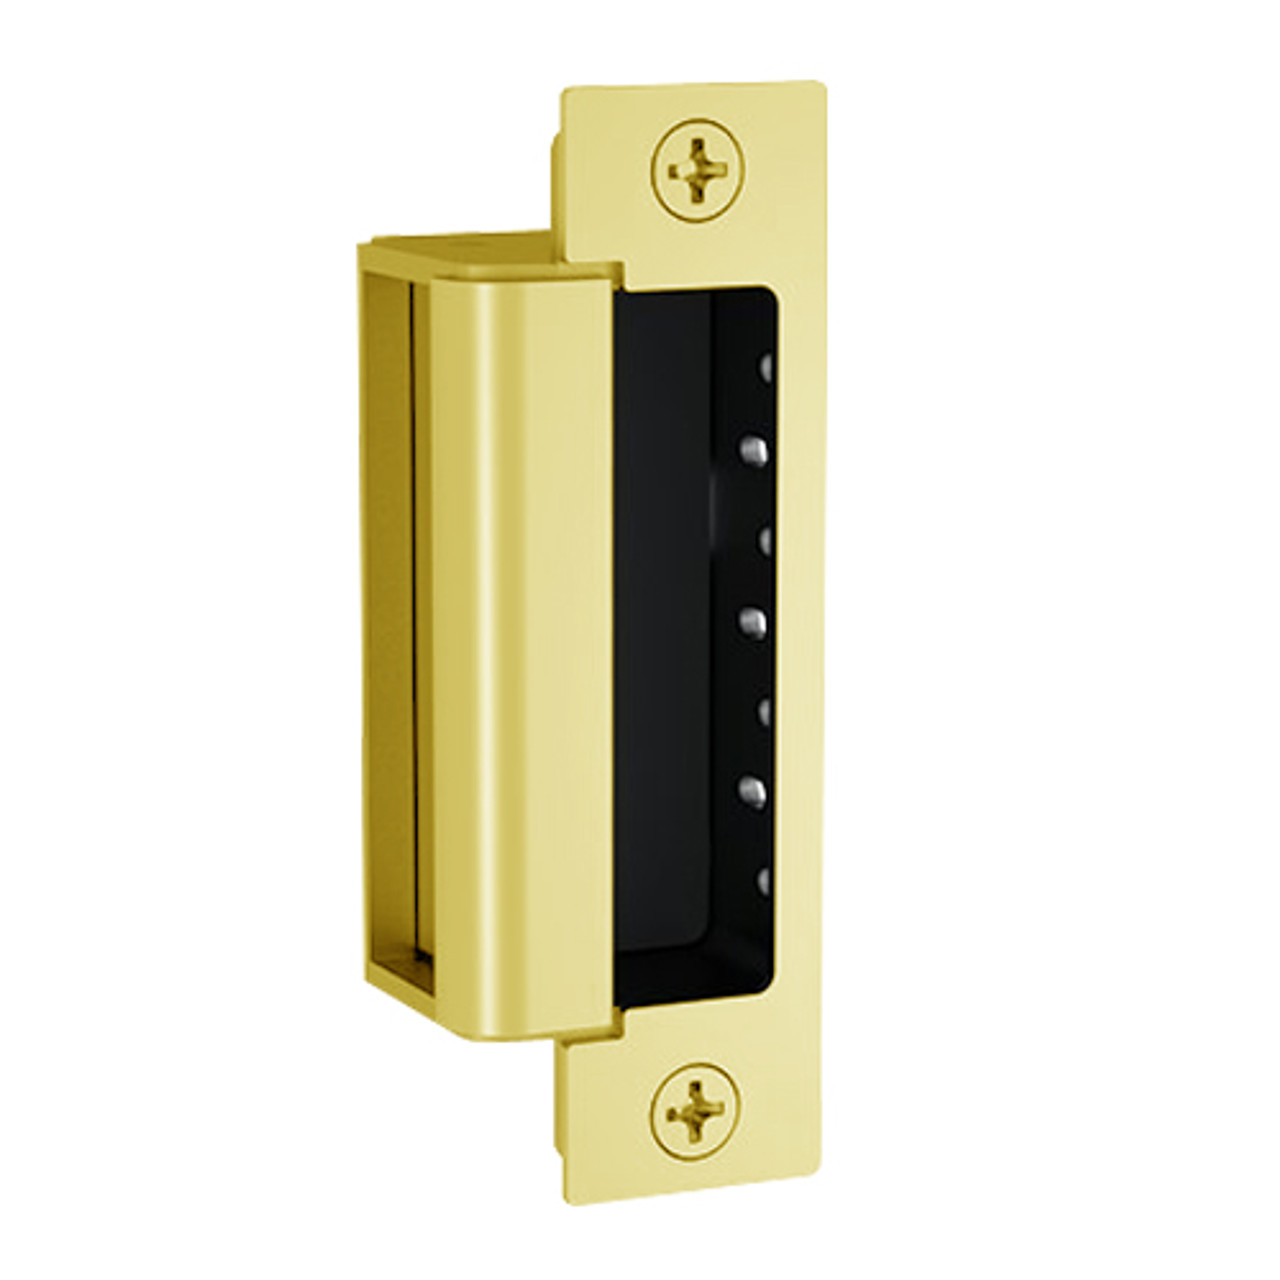 1600-LM-605 Hes 1600 Series Dynamic Low Profile Electric Strike Bodies with Lock Monitor in Bright Brass